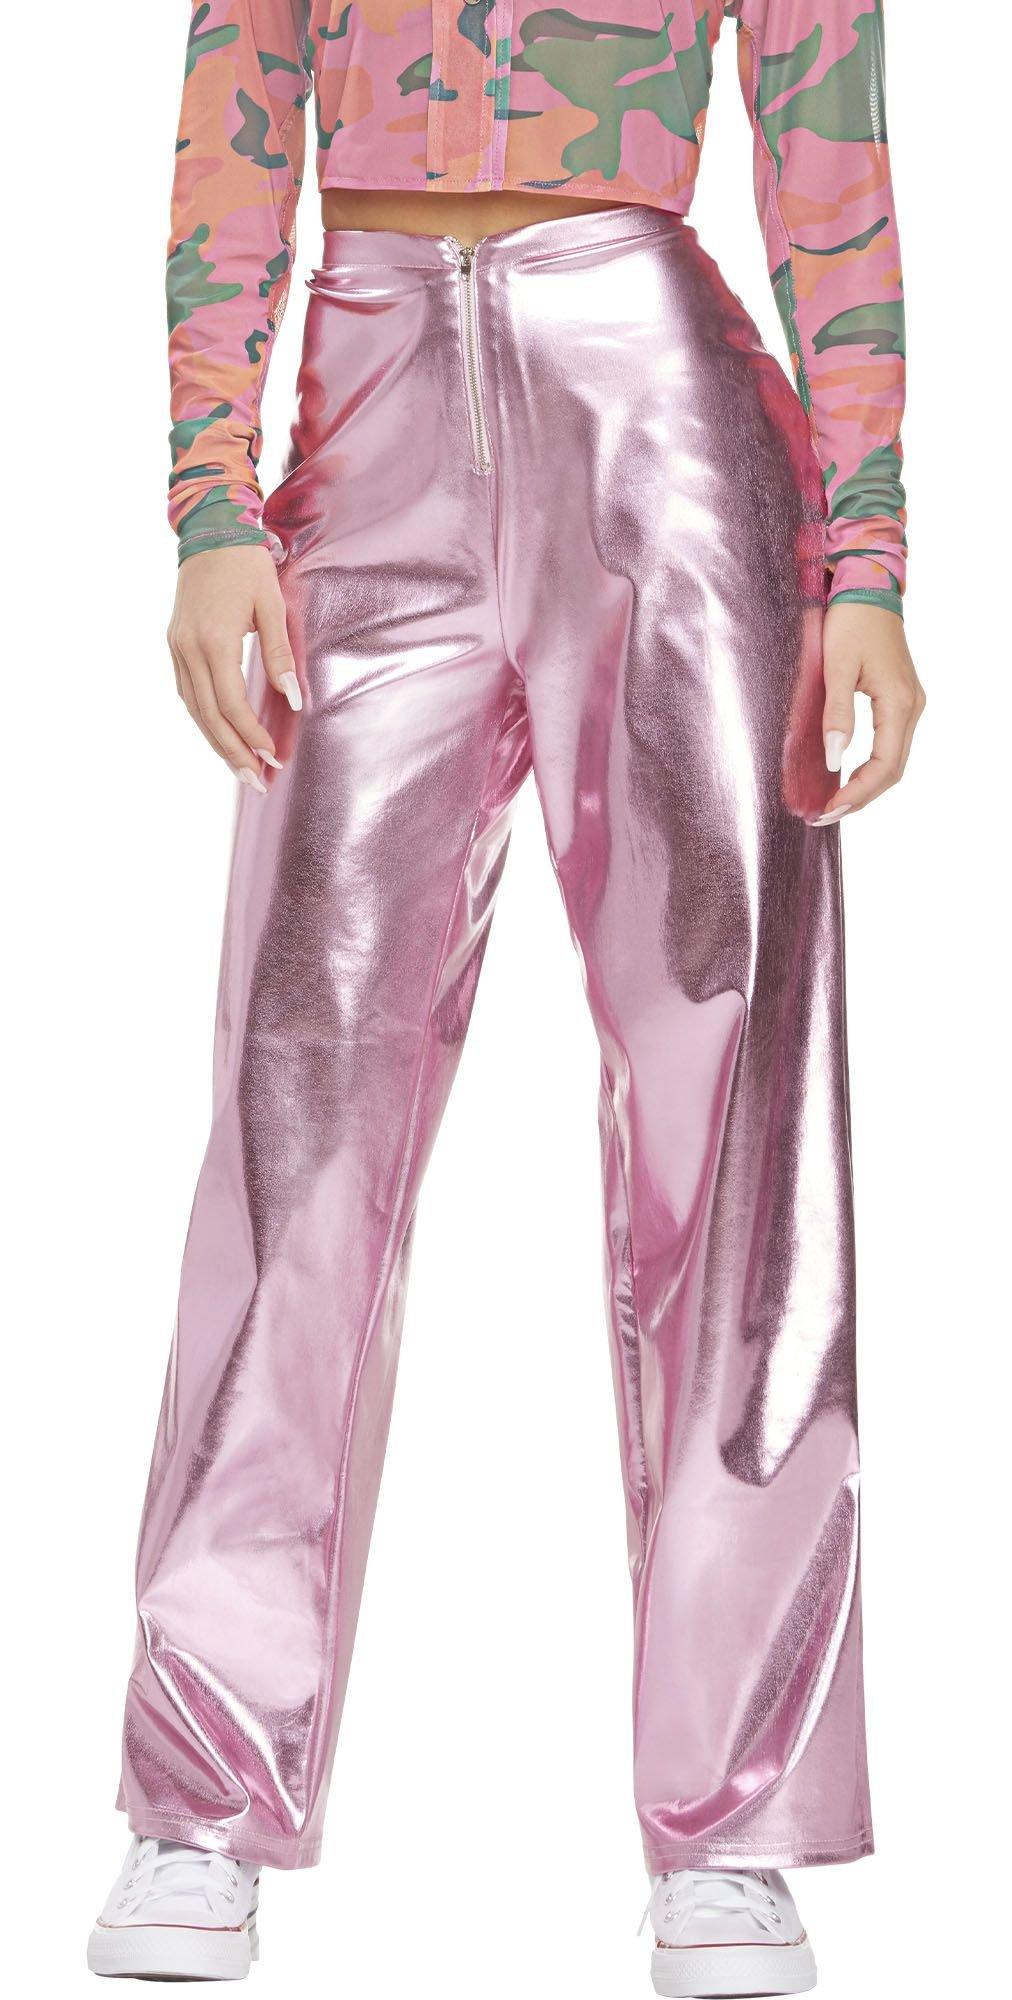 Metallic Pink Pants for Adults | Party City